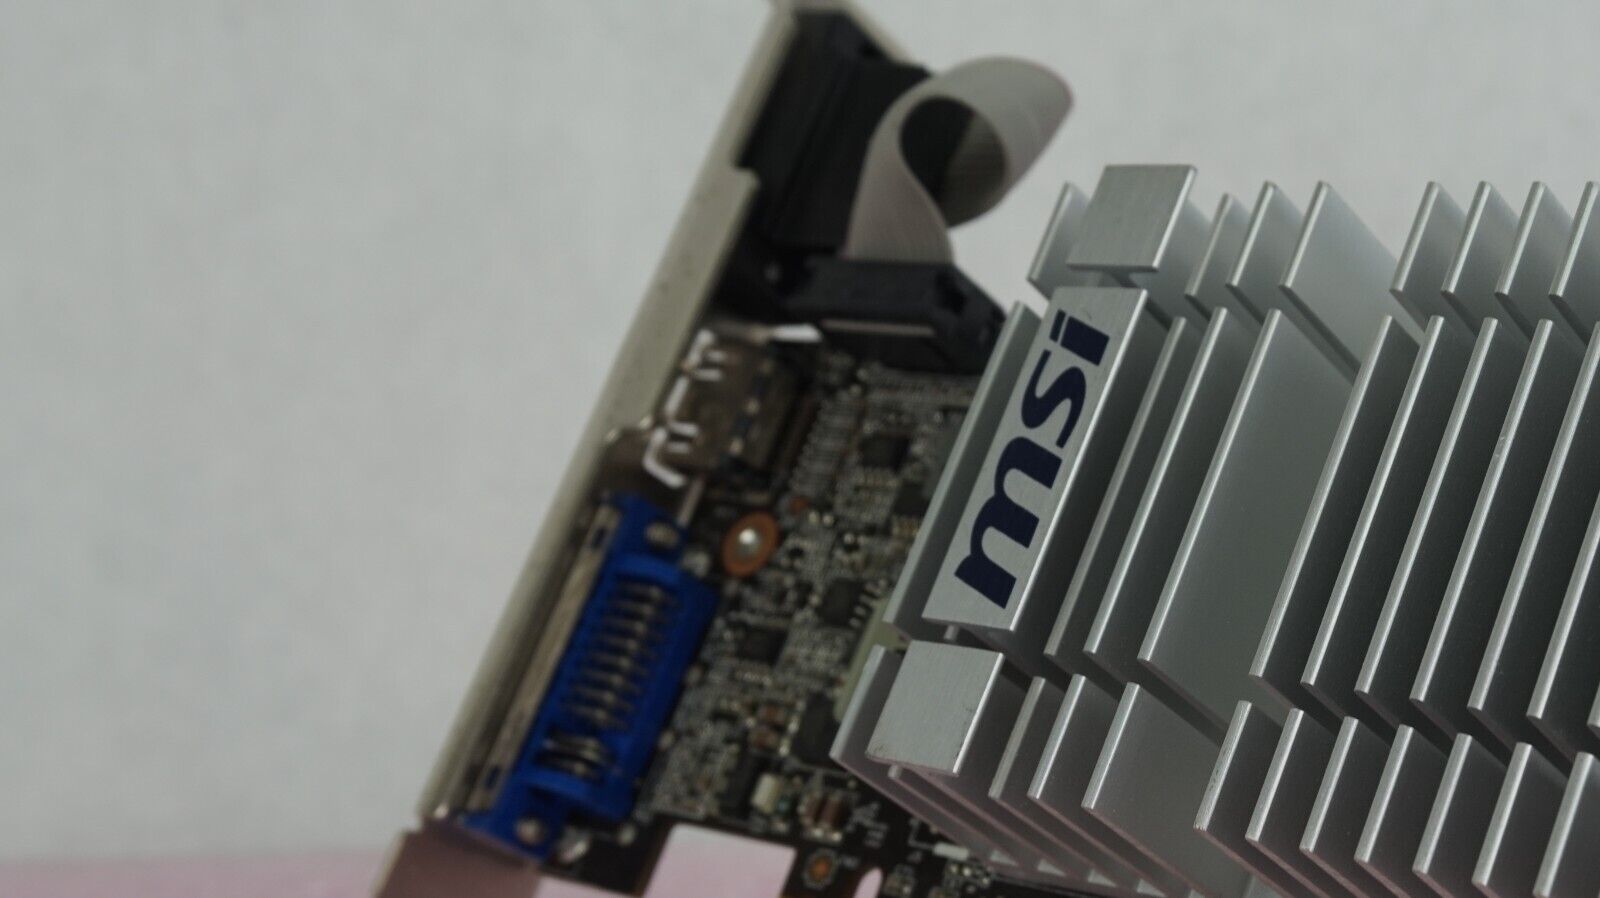 MSI GeForce 8400GS 512MB PCI-e Silent Graphics Card